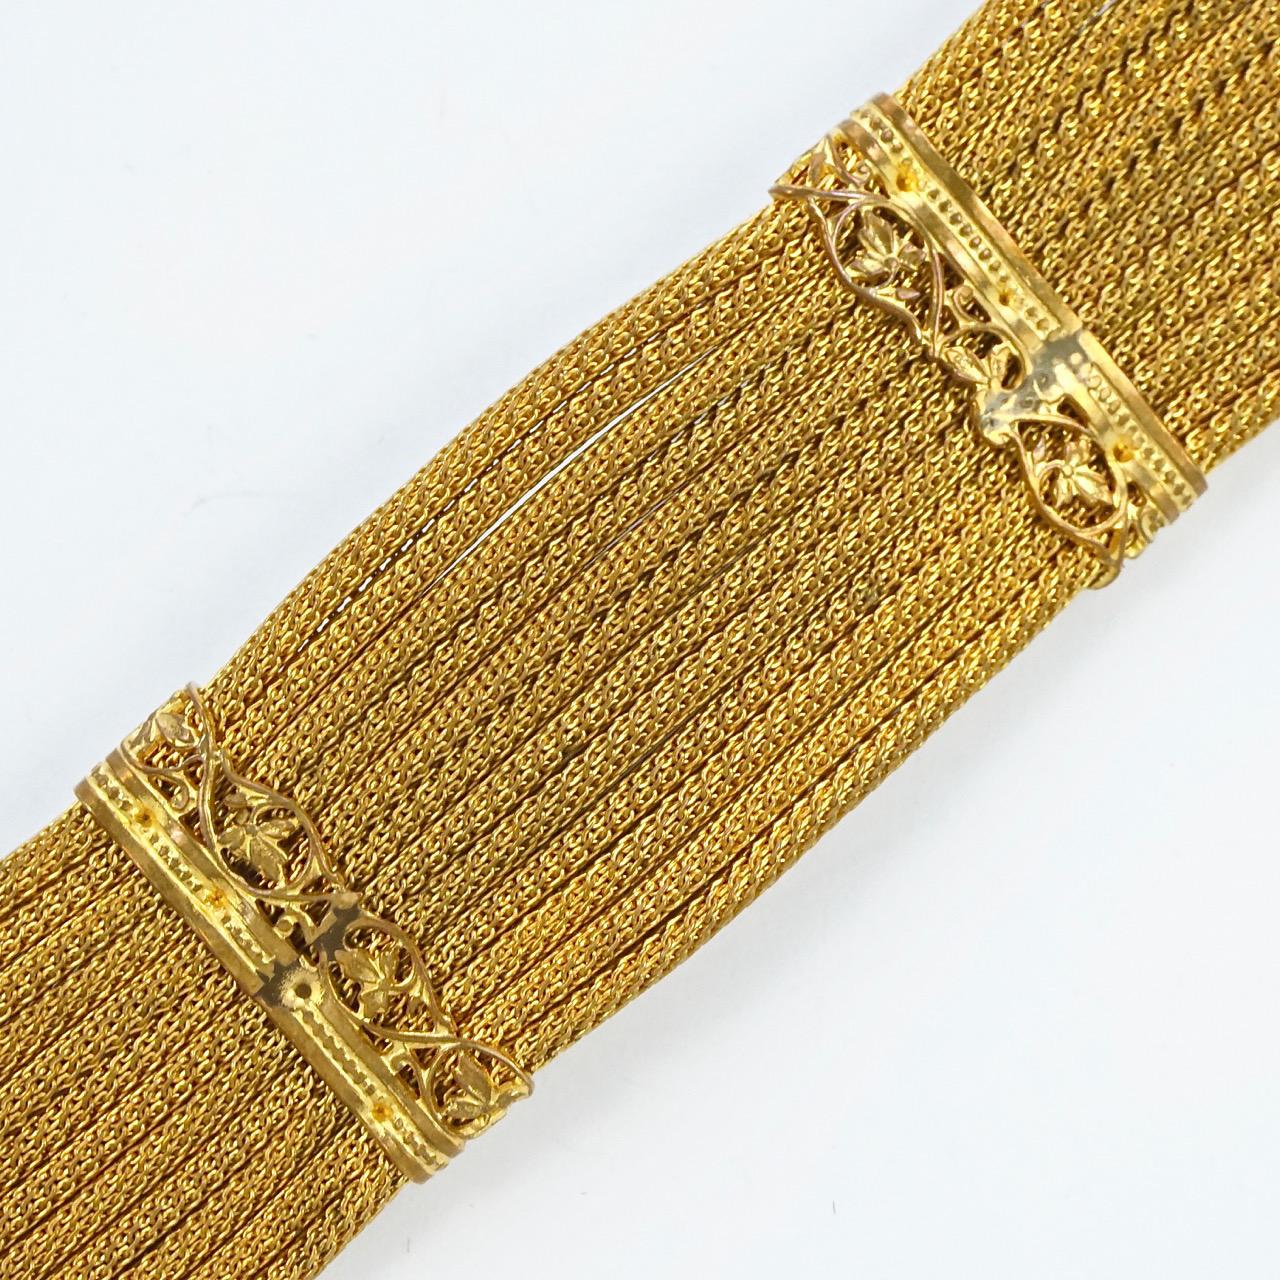 Art Deco Gold Plated Mesh Bracelet with Green Jewels circa 1920s For Sale 2